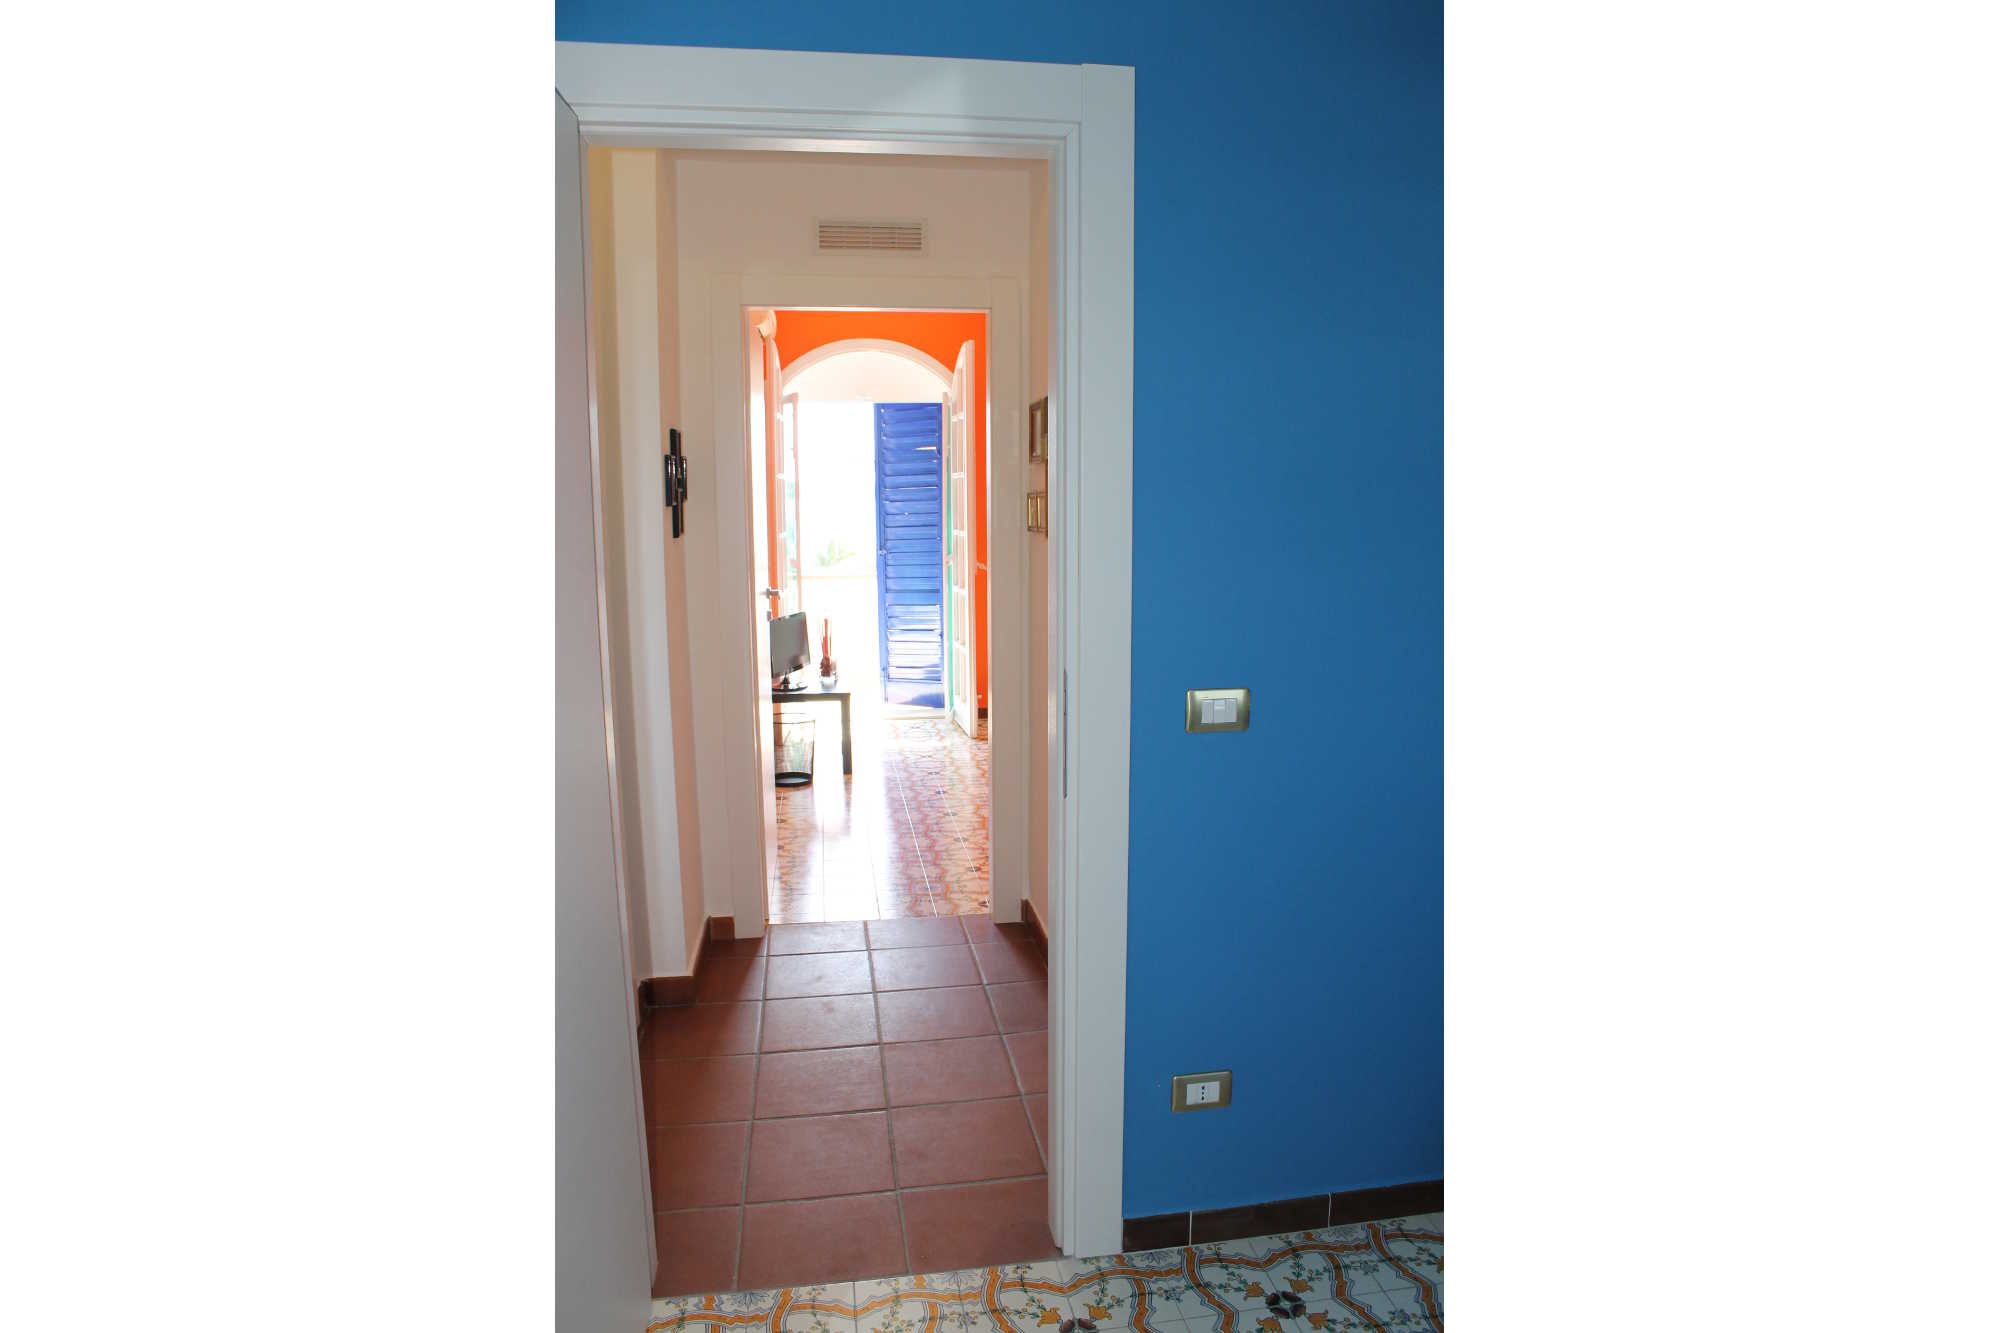 Le Saline B&B Siracusa Orange Room: from second room to the first one